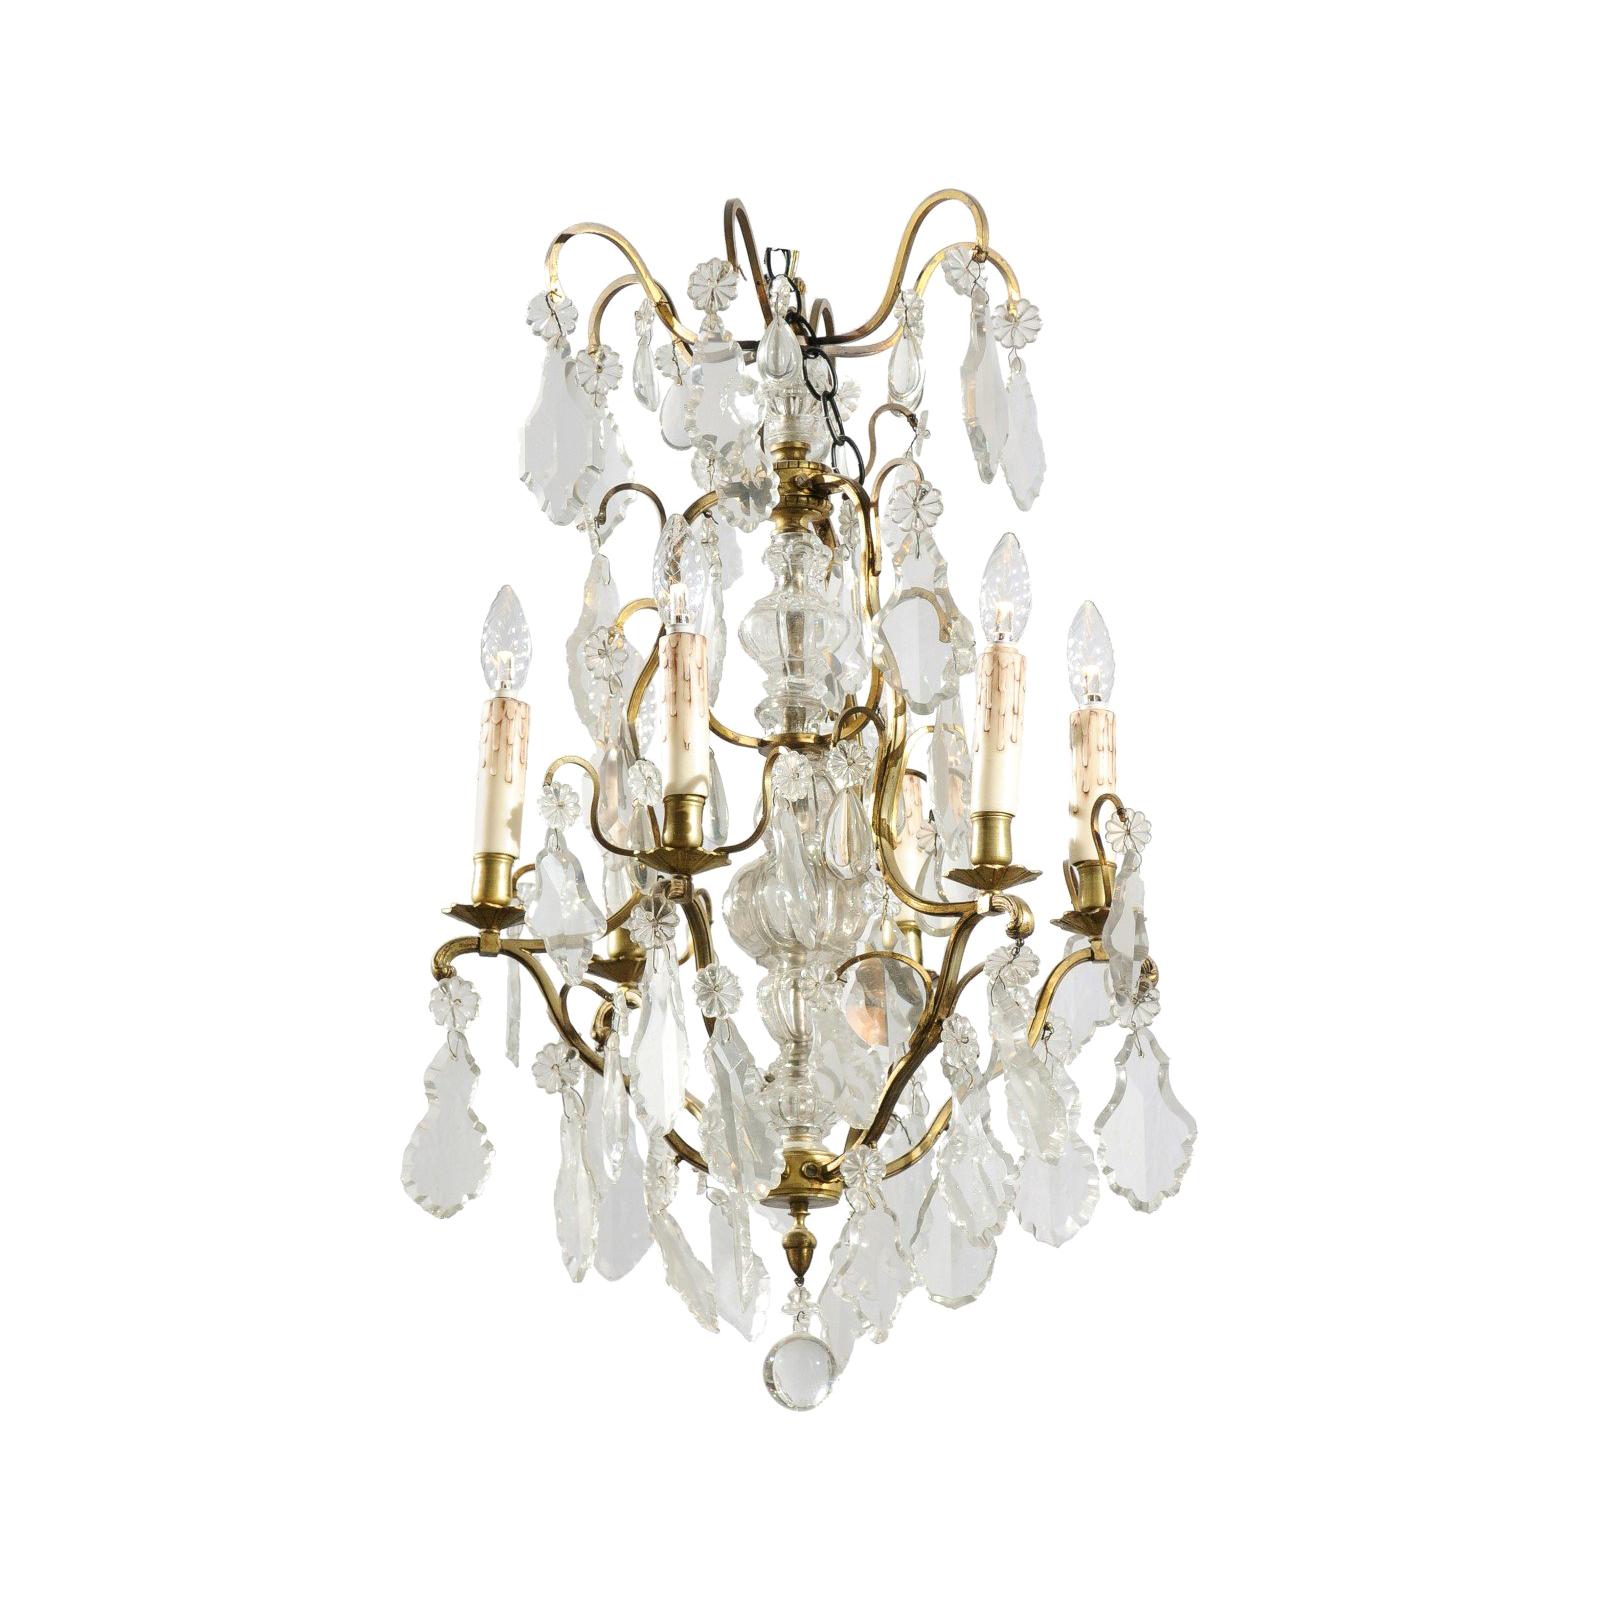 French 19th Century Six-Light Bronze and Crystal Chandelier with Scrolling Arms For Sale